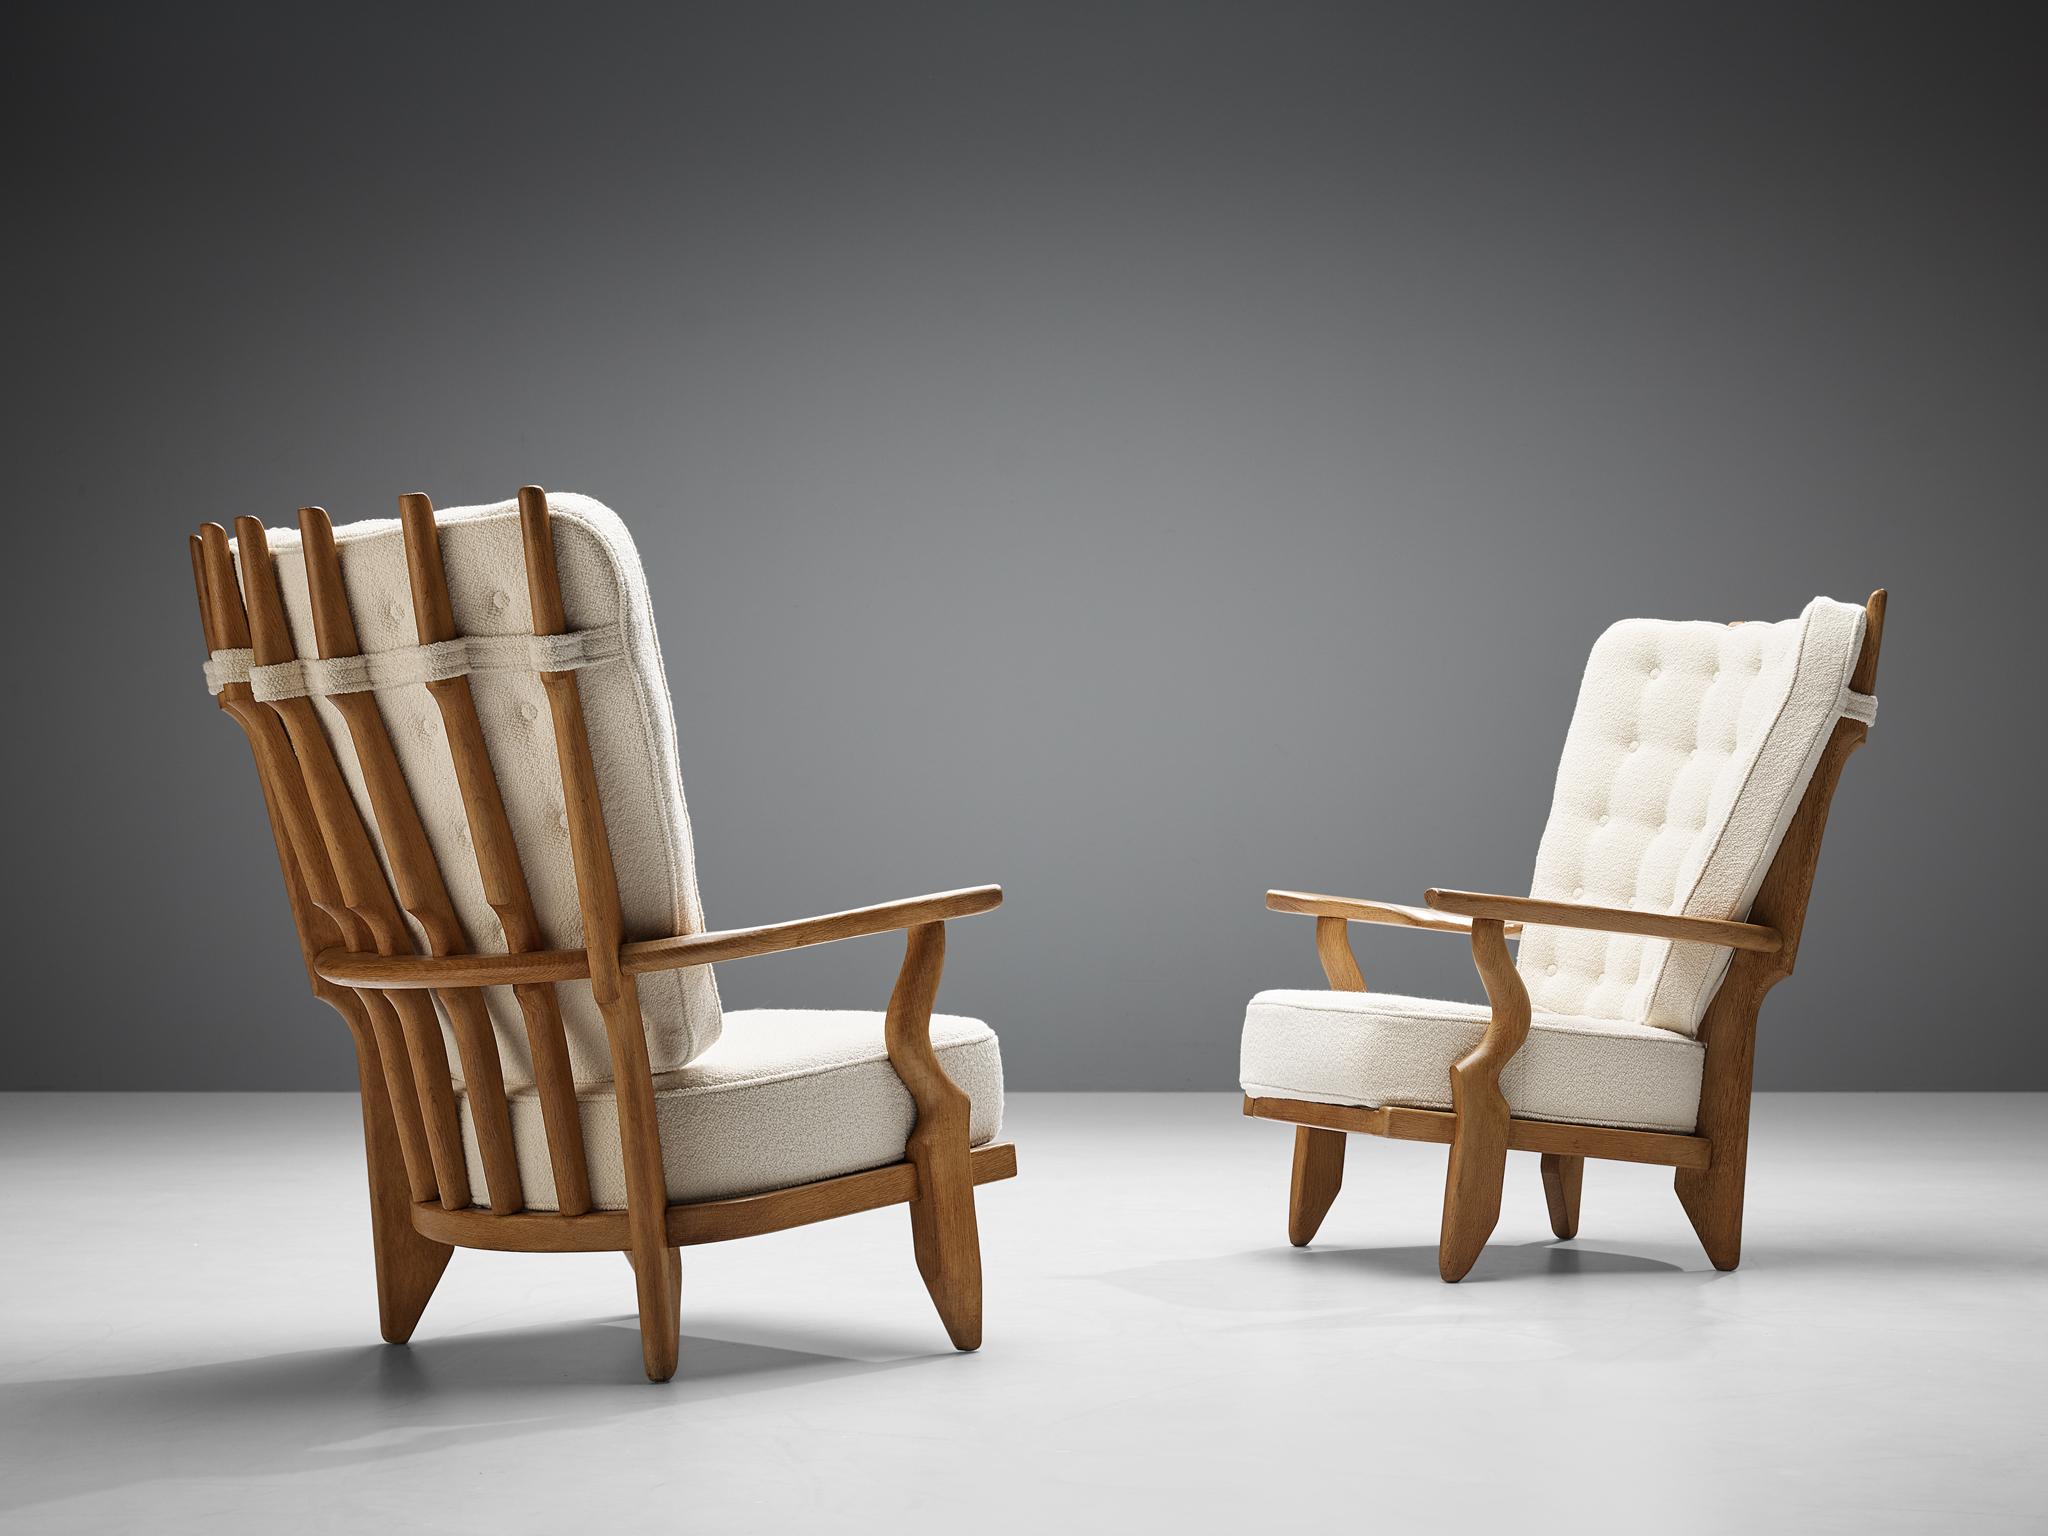 Guillerme & Chambron, pair of 'Grand Repos' lounge chair oak, Pierre Frey white wool upholstery, oak, France, 1960s.

French designer duo Guillerme & Chambron are known for their high quality furniture made in solid oak, and these lounge chairs are